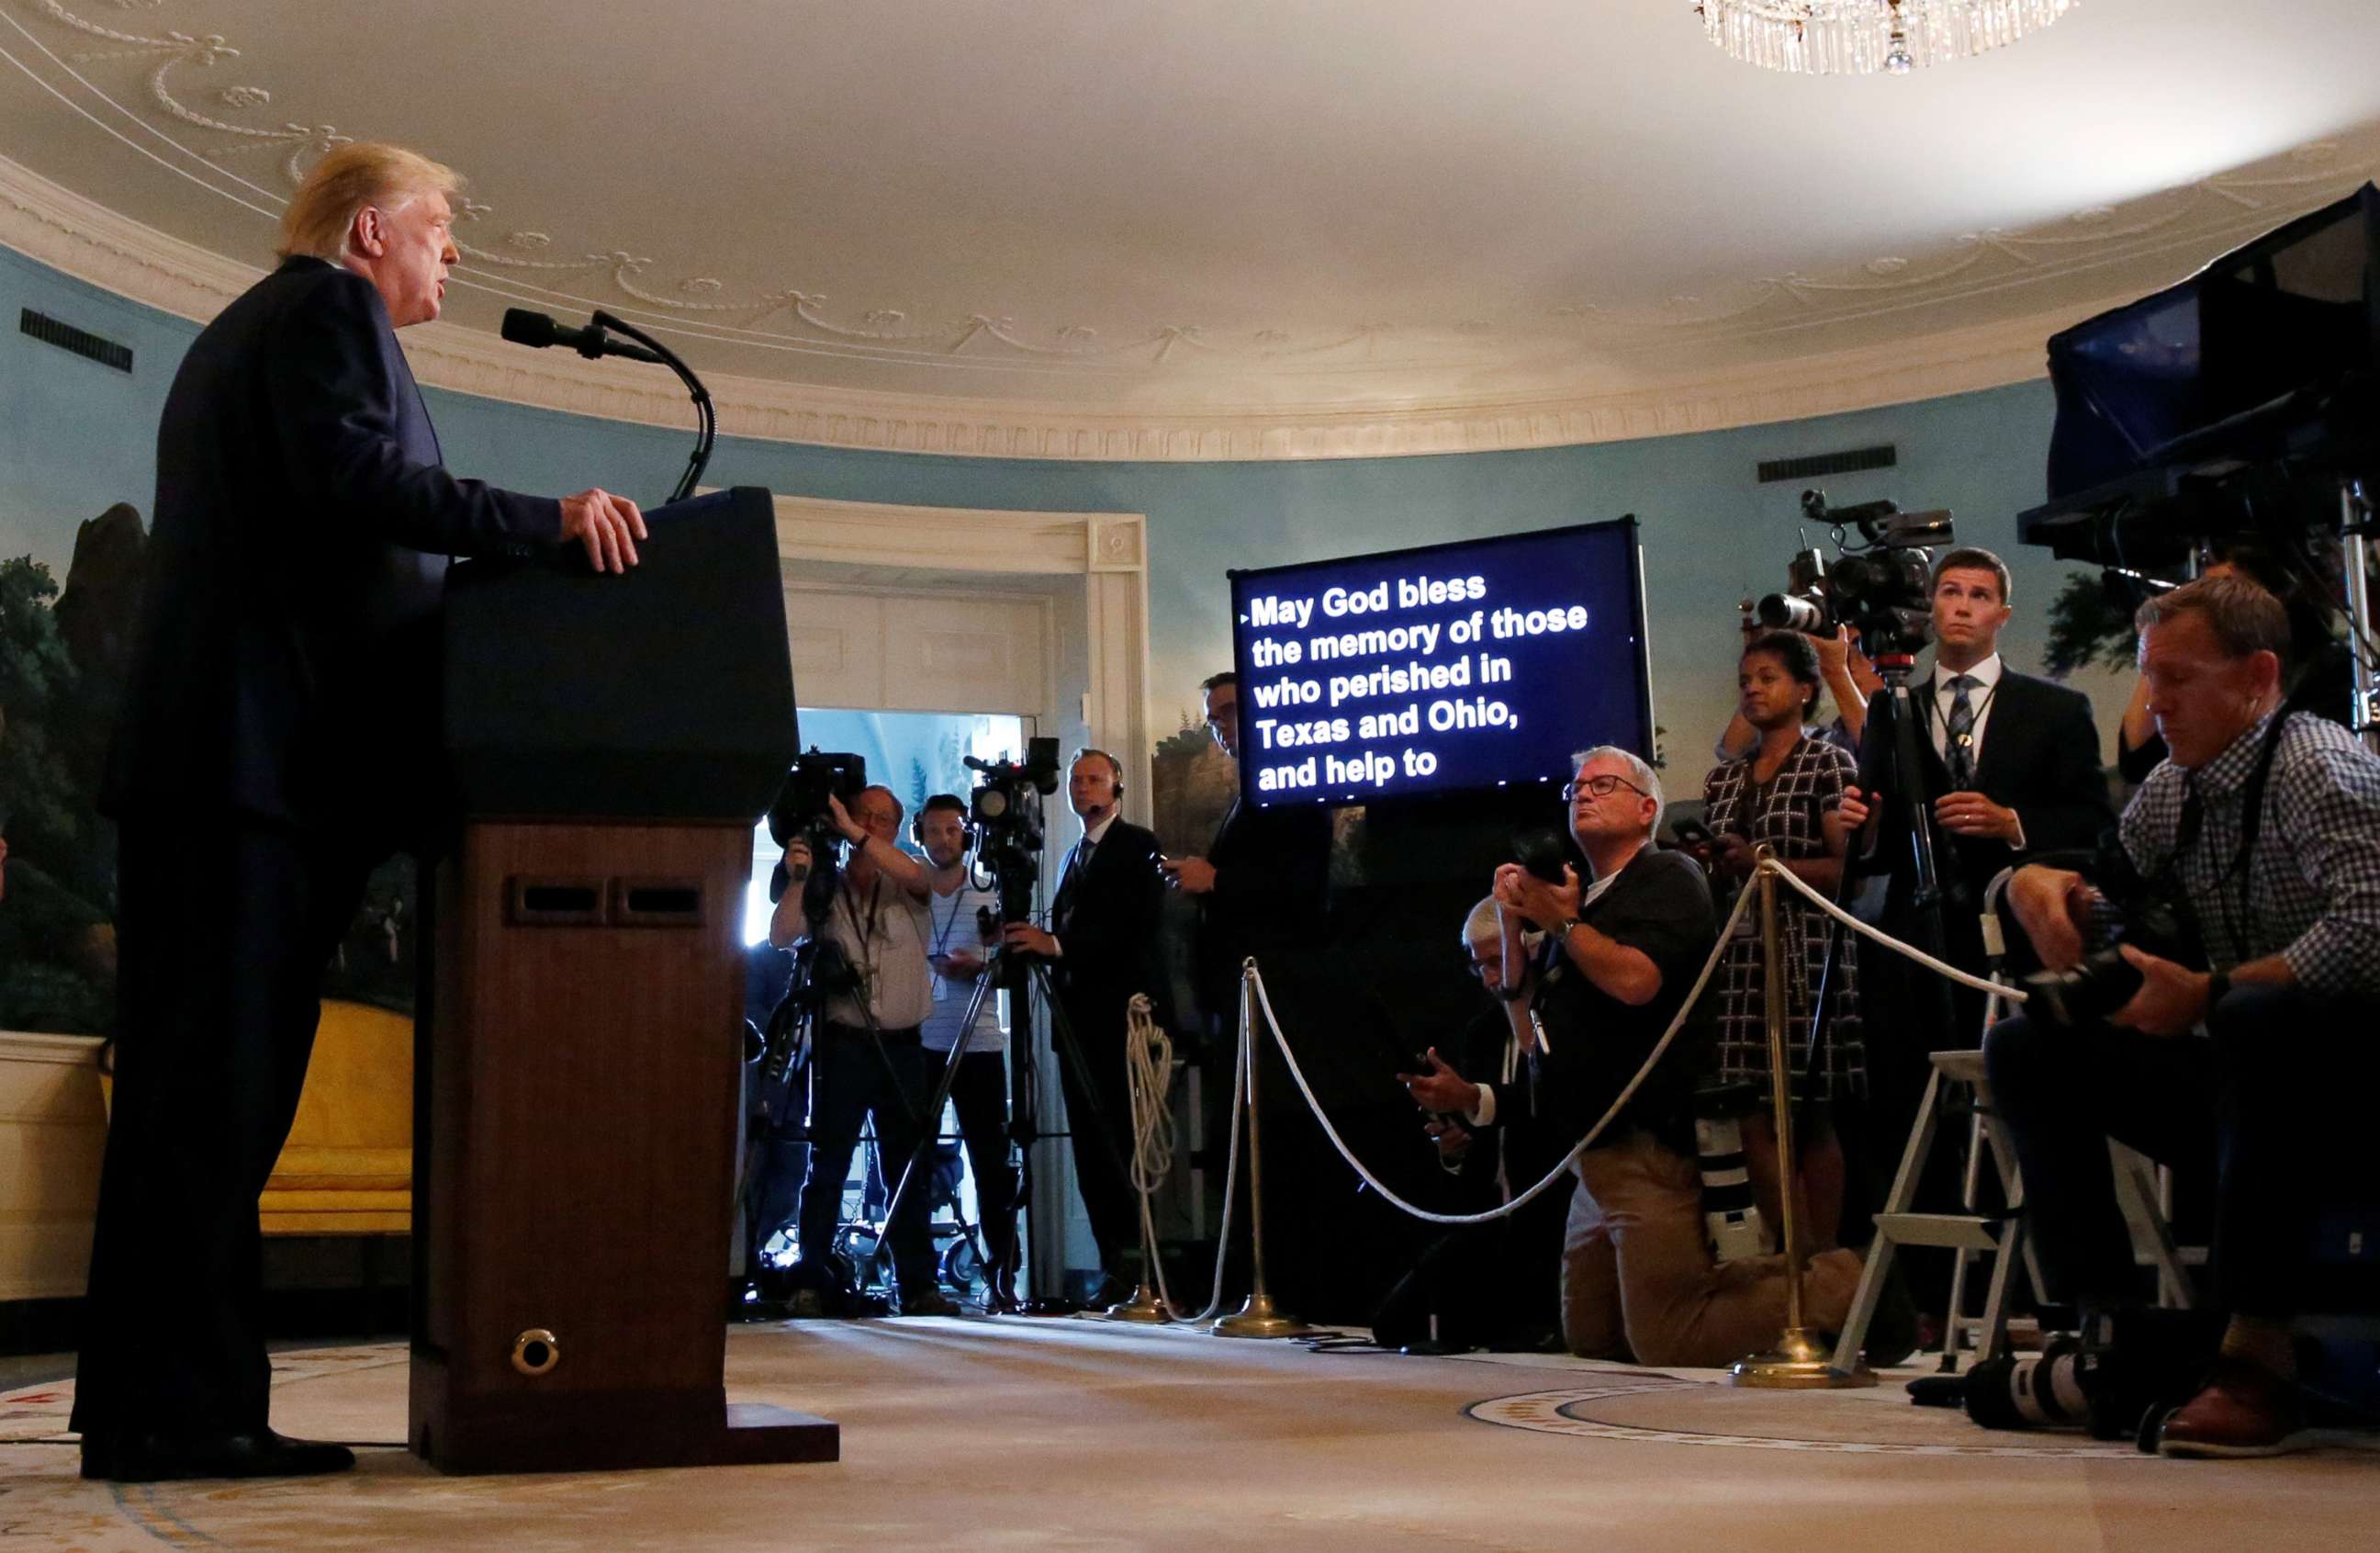 PHOTO: President Donald Trump makes a statement to the news media about the recent mass shootings in El Paso, Texas, and Dayton, Ohio, from the Diplomatic Reception Room of the White House, Aug. 5, 2019.